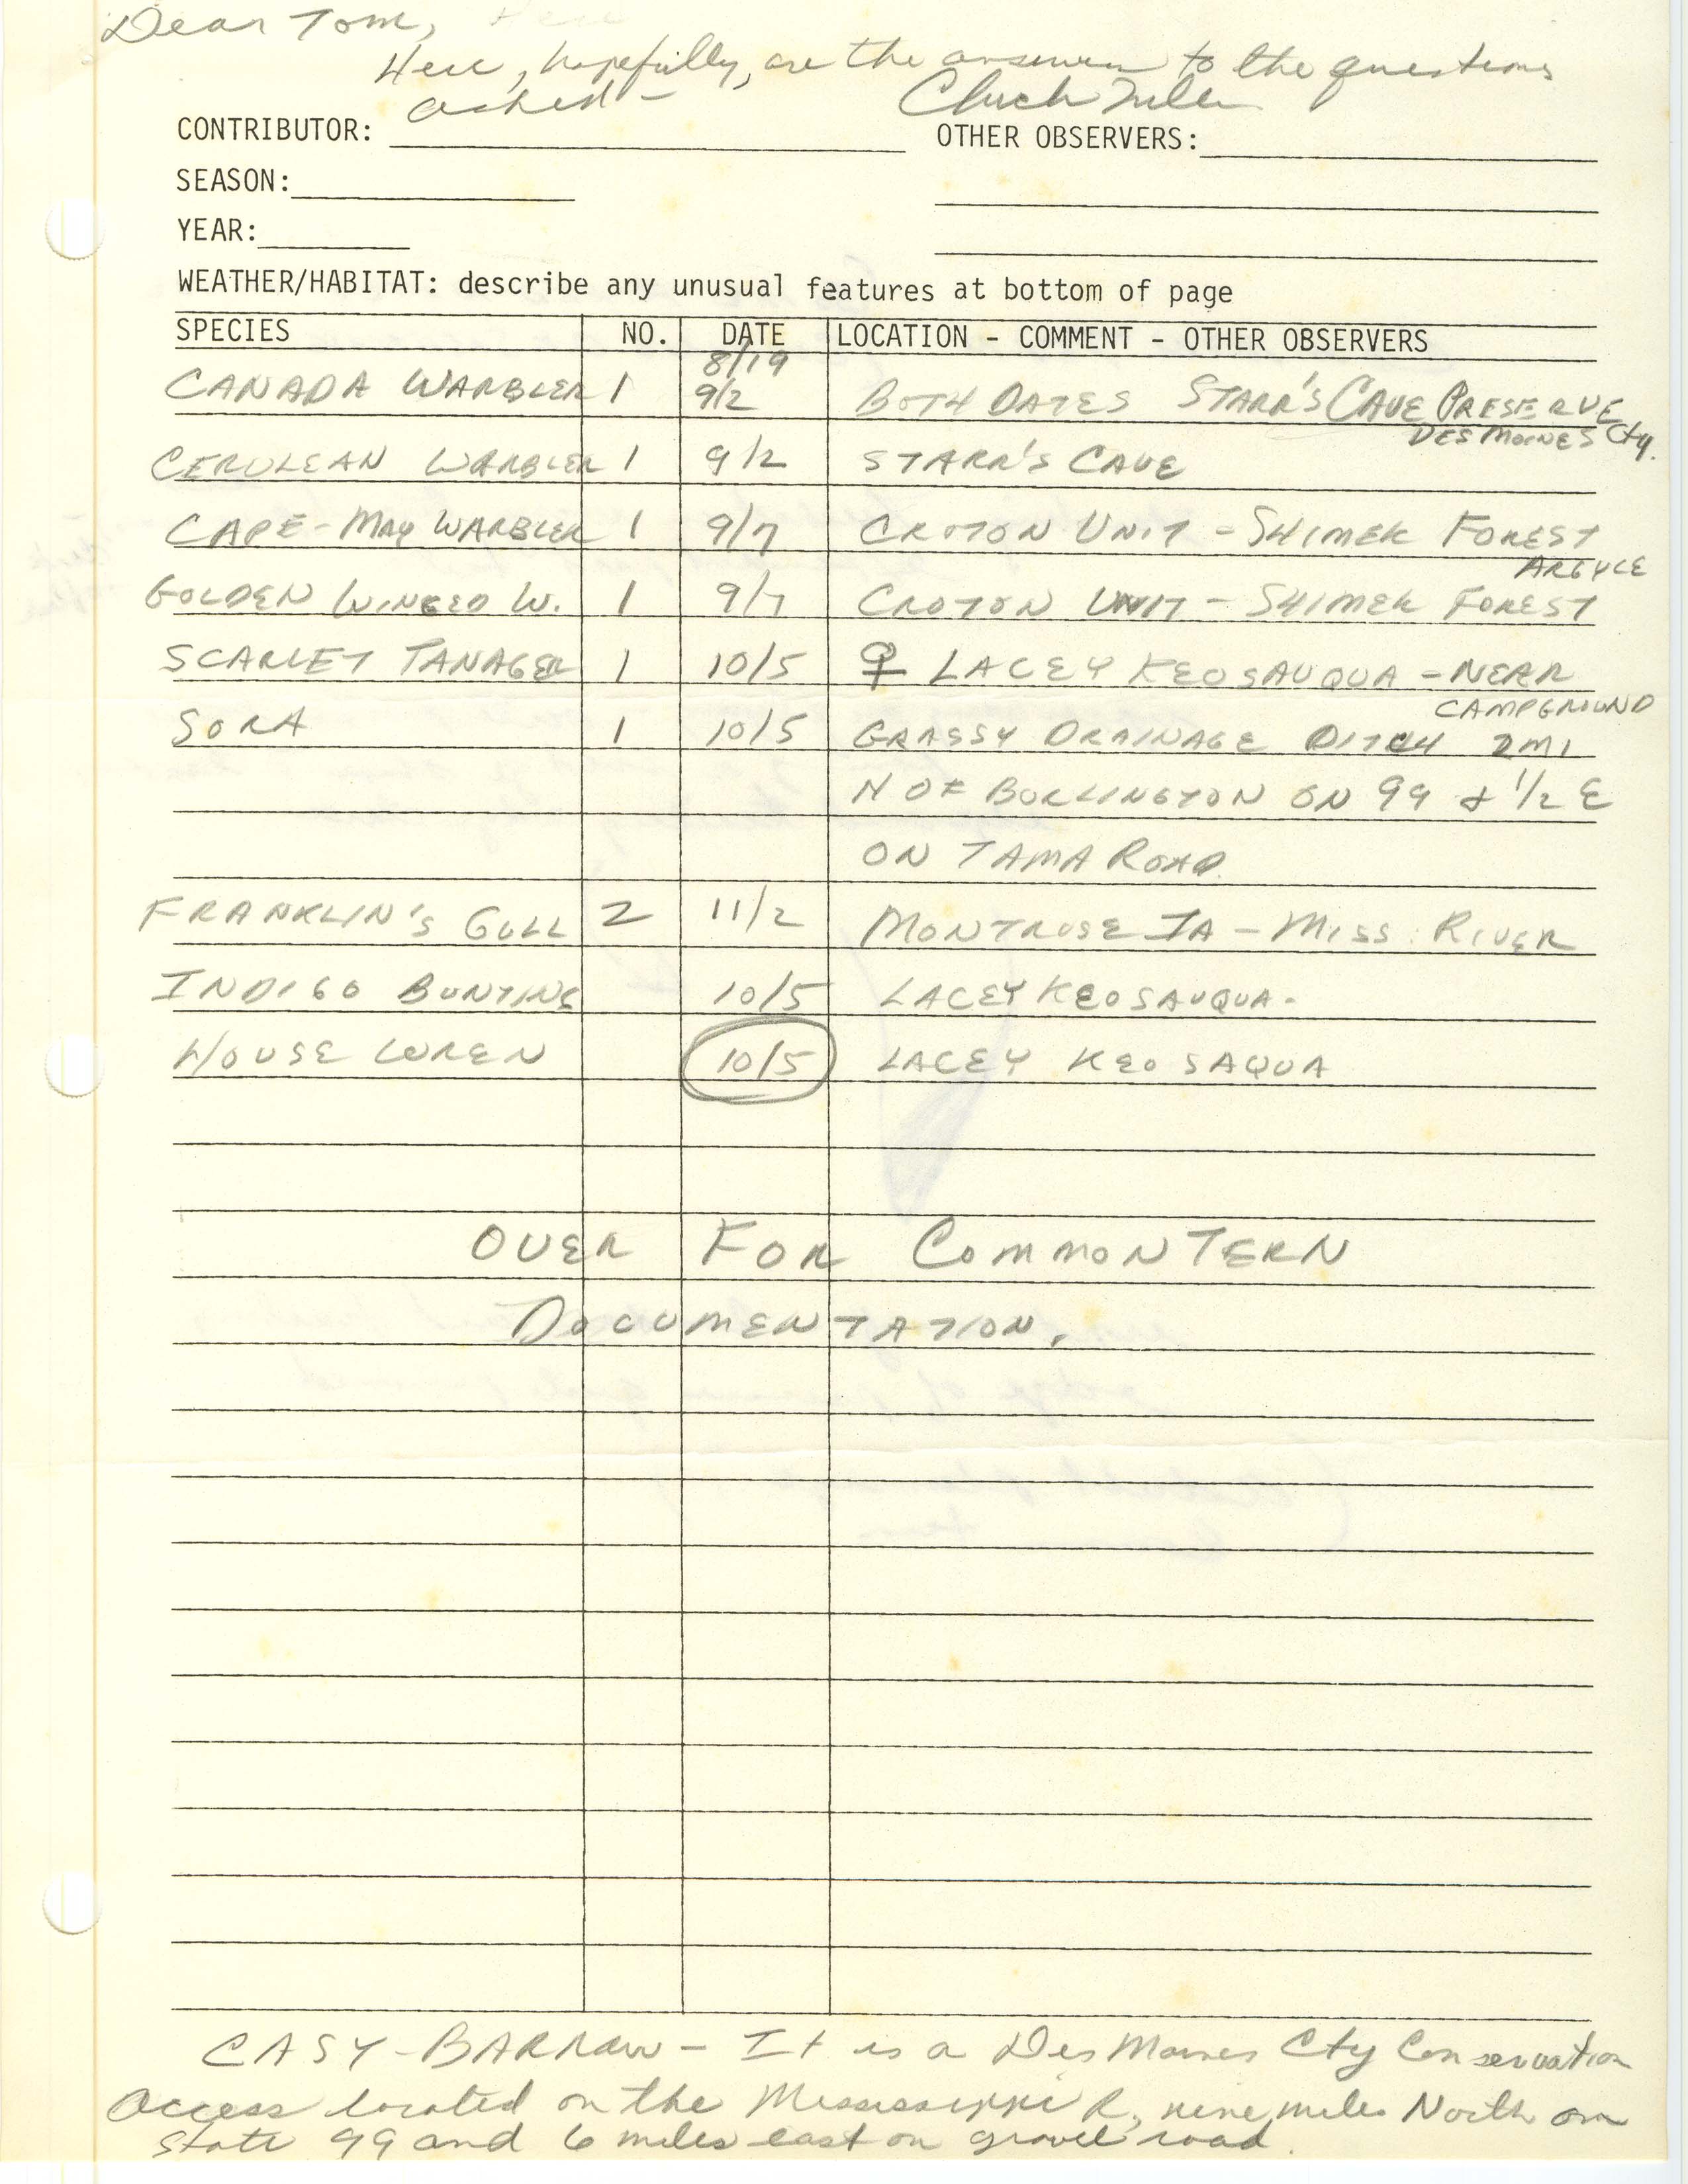 Field note additions contributed by Charles Fuller to Thomas H. Kent, fall 1991  